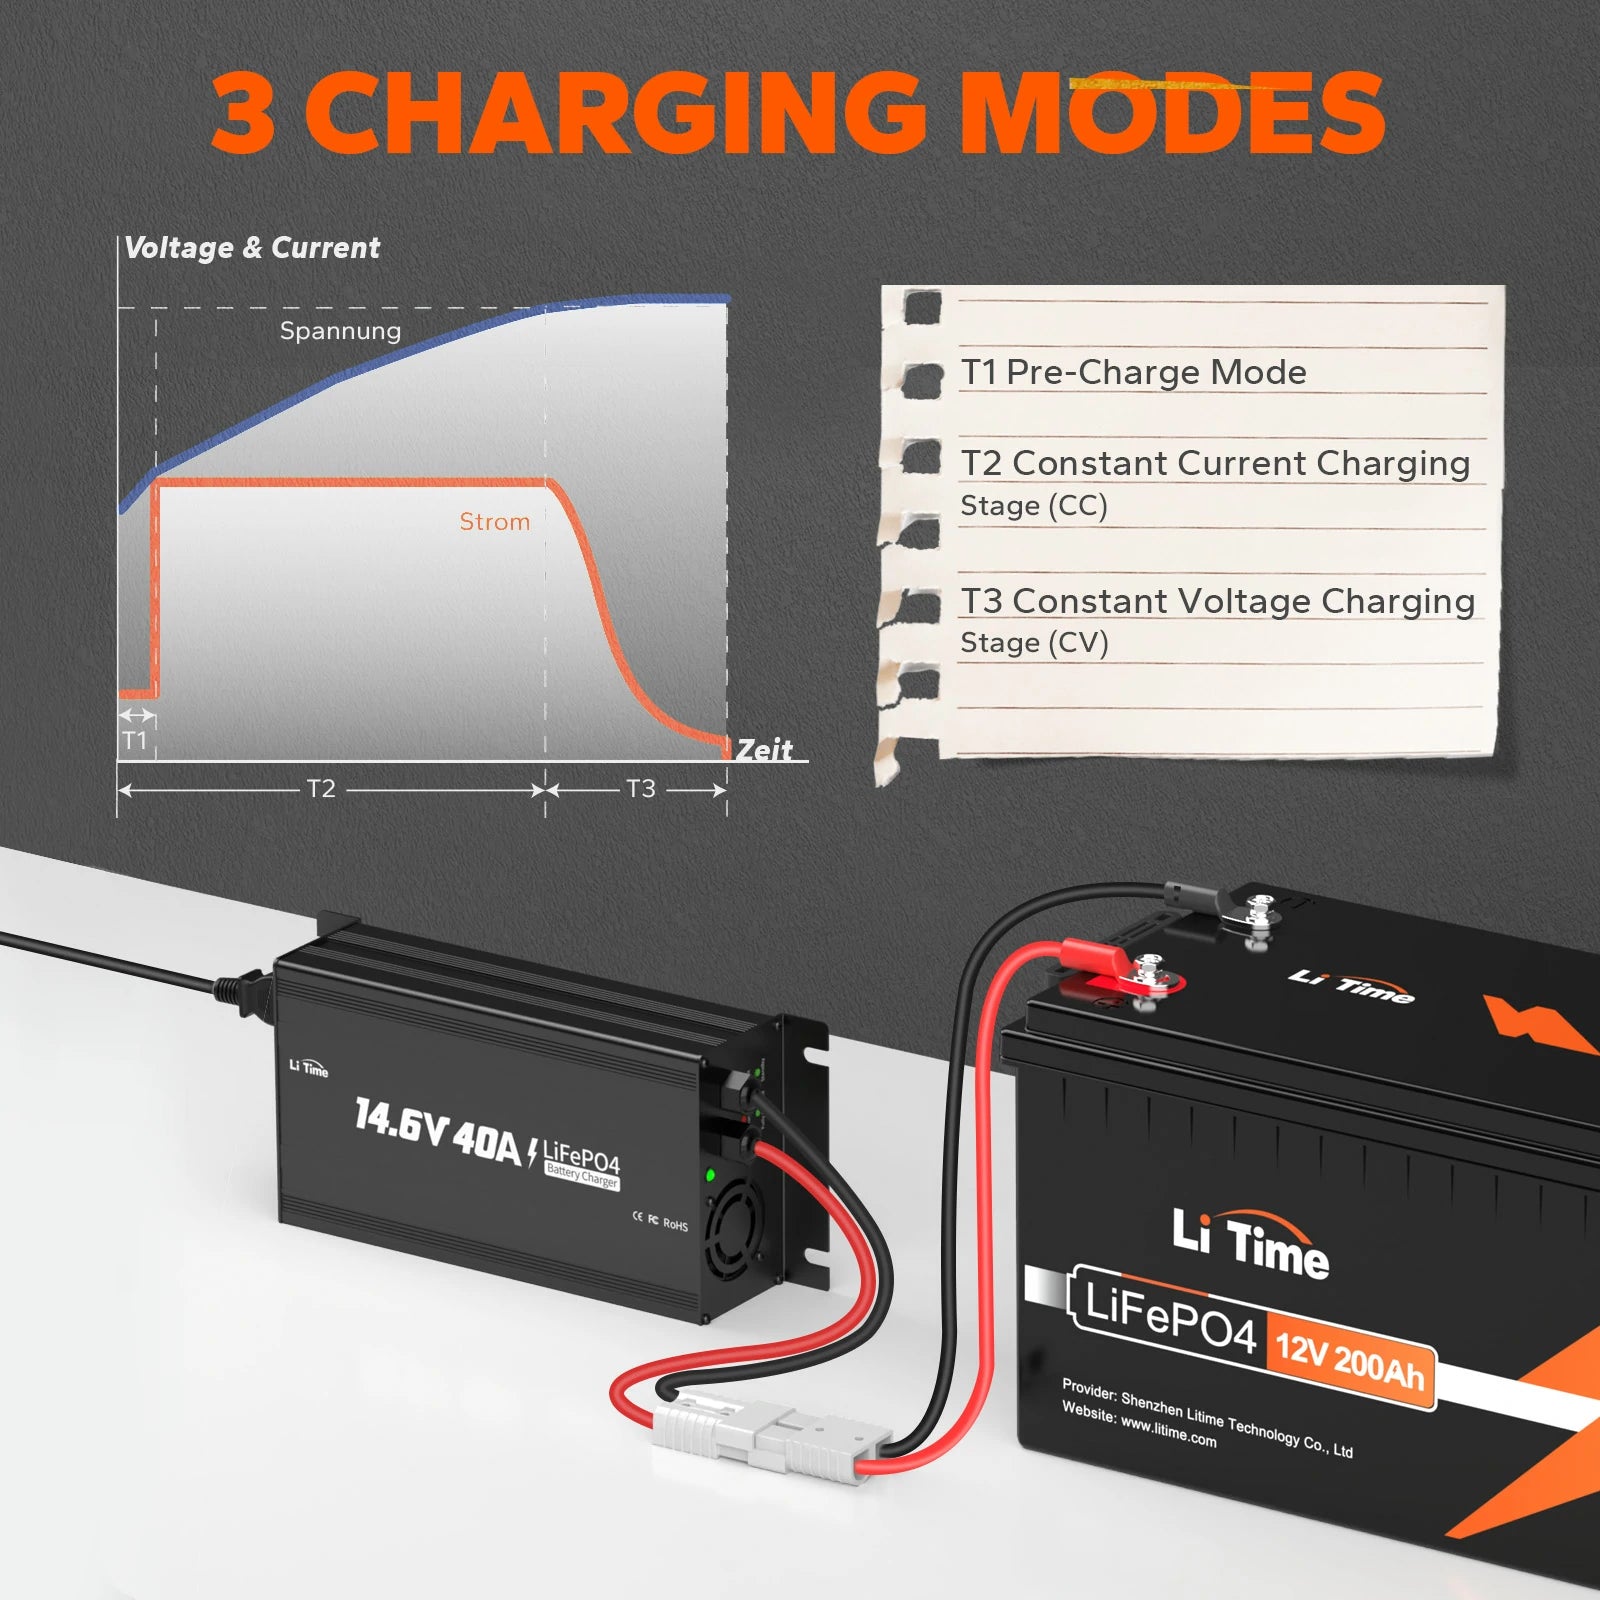 charging modes of lithium battery